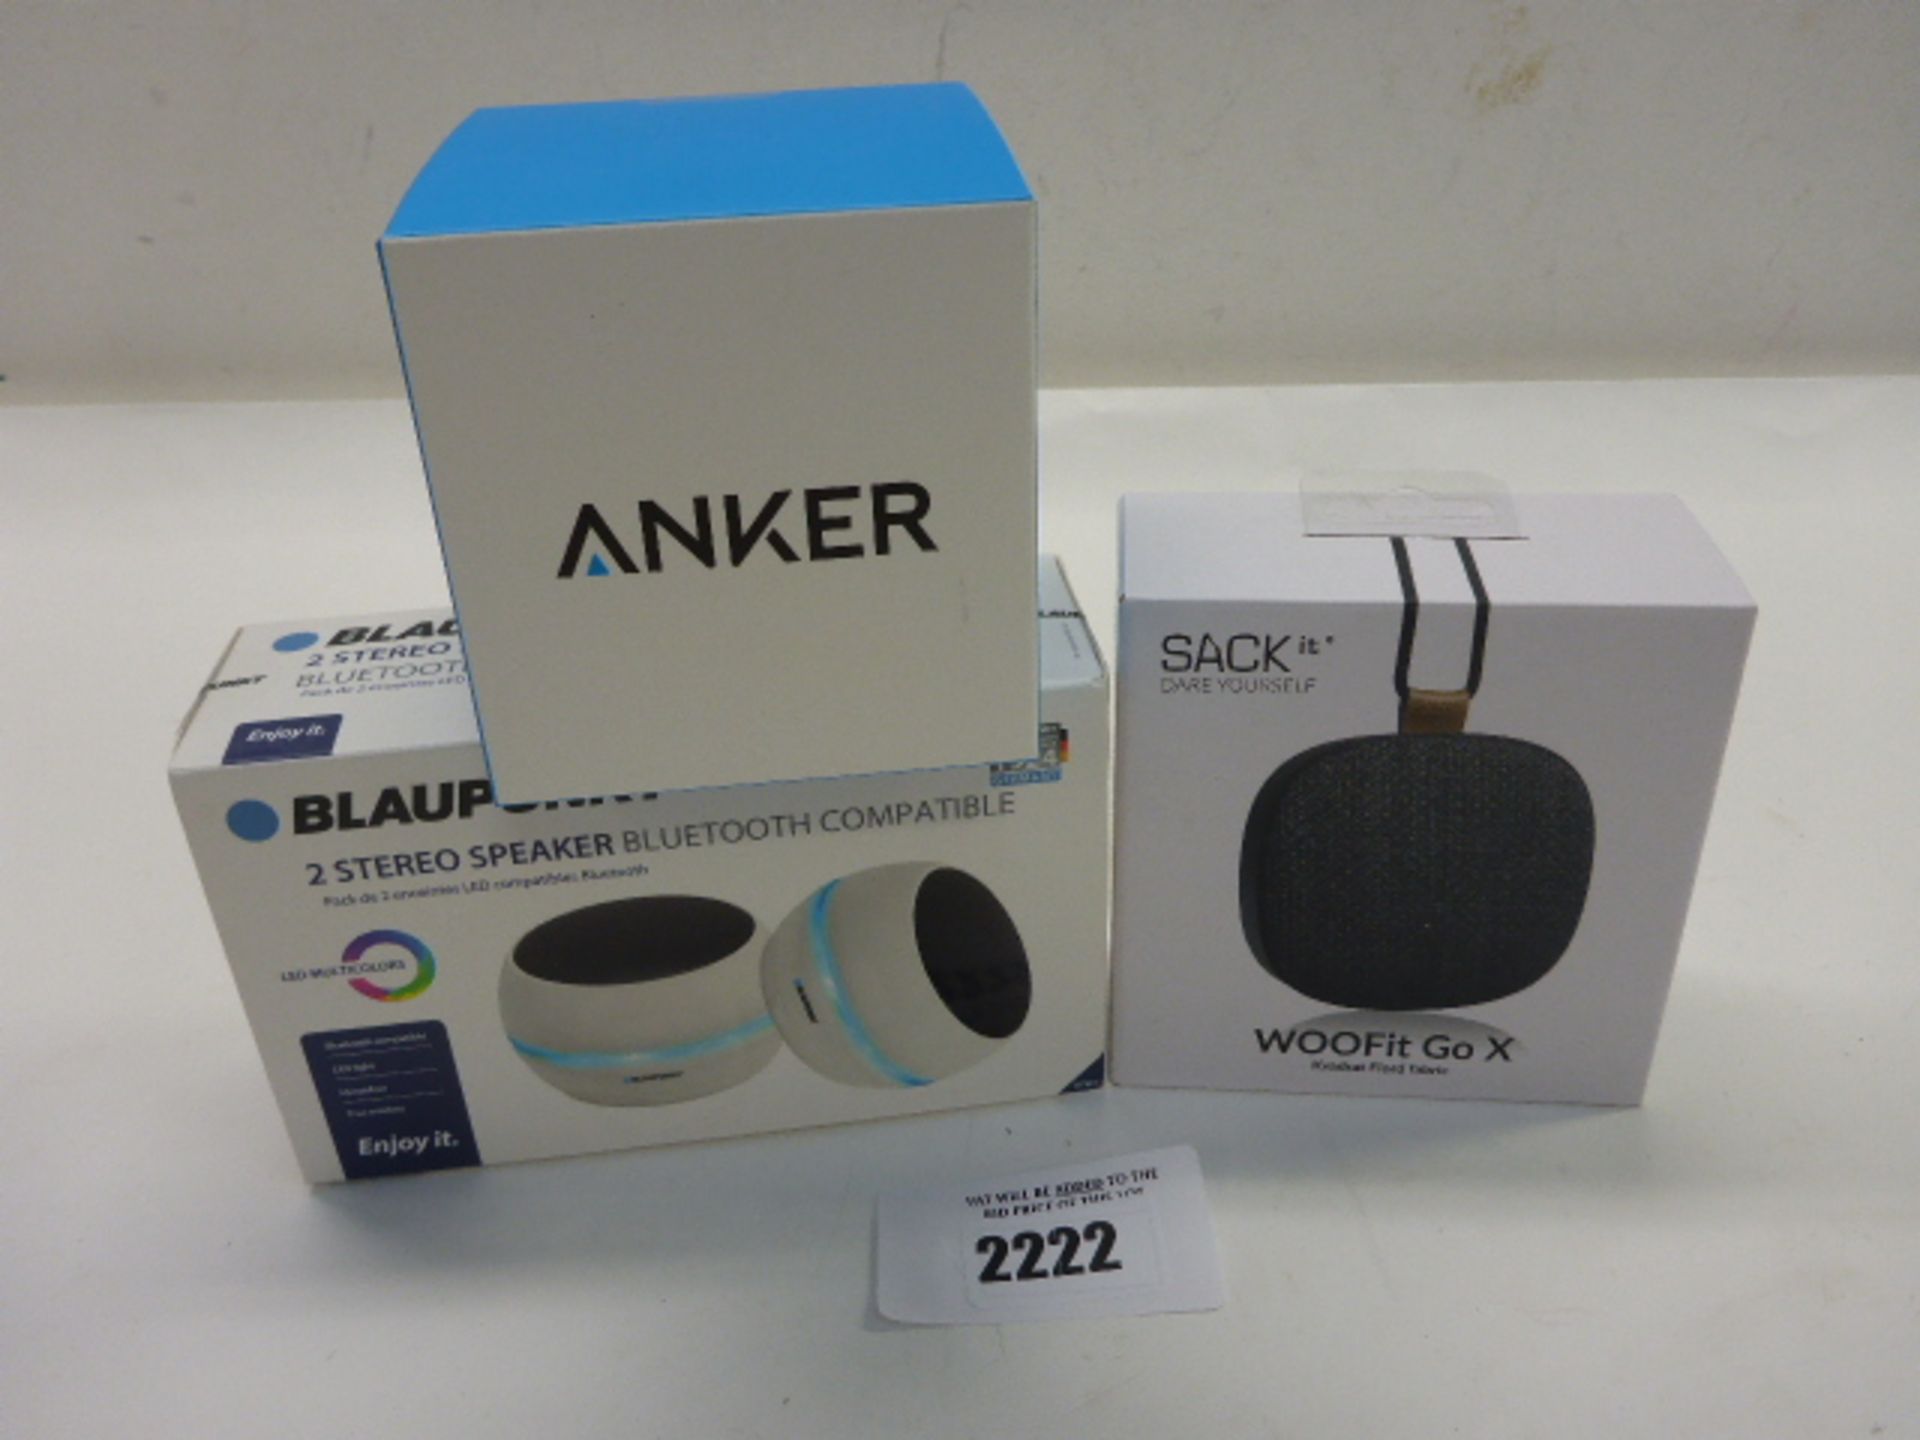 3x portable wireless speakers; Anker SoundCore, Sack WOOFit Go X and Blaupunkt